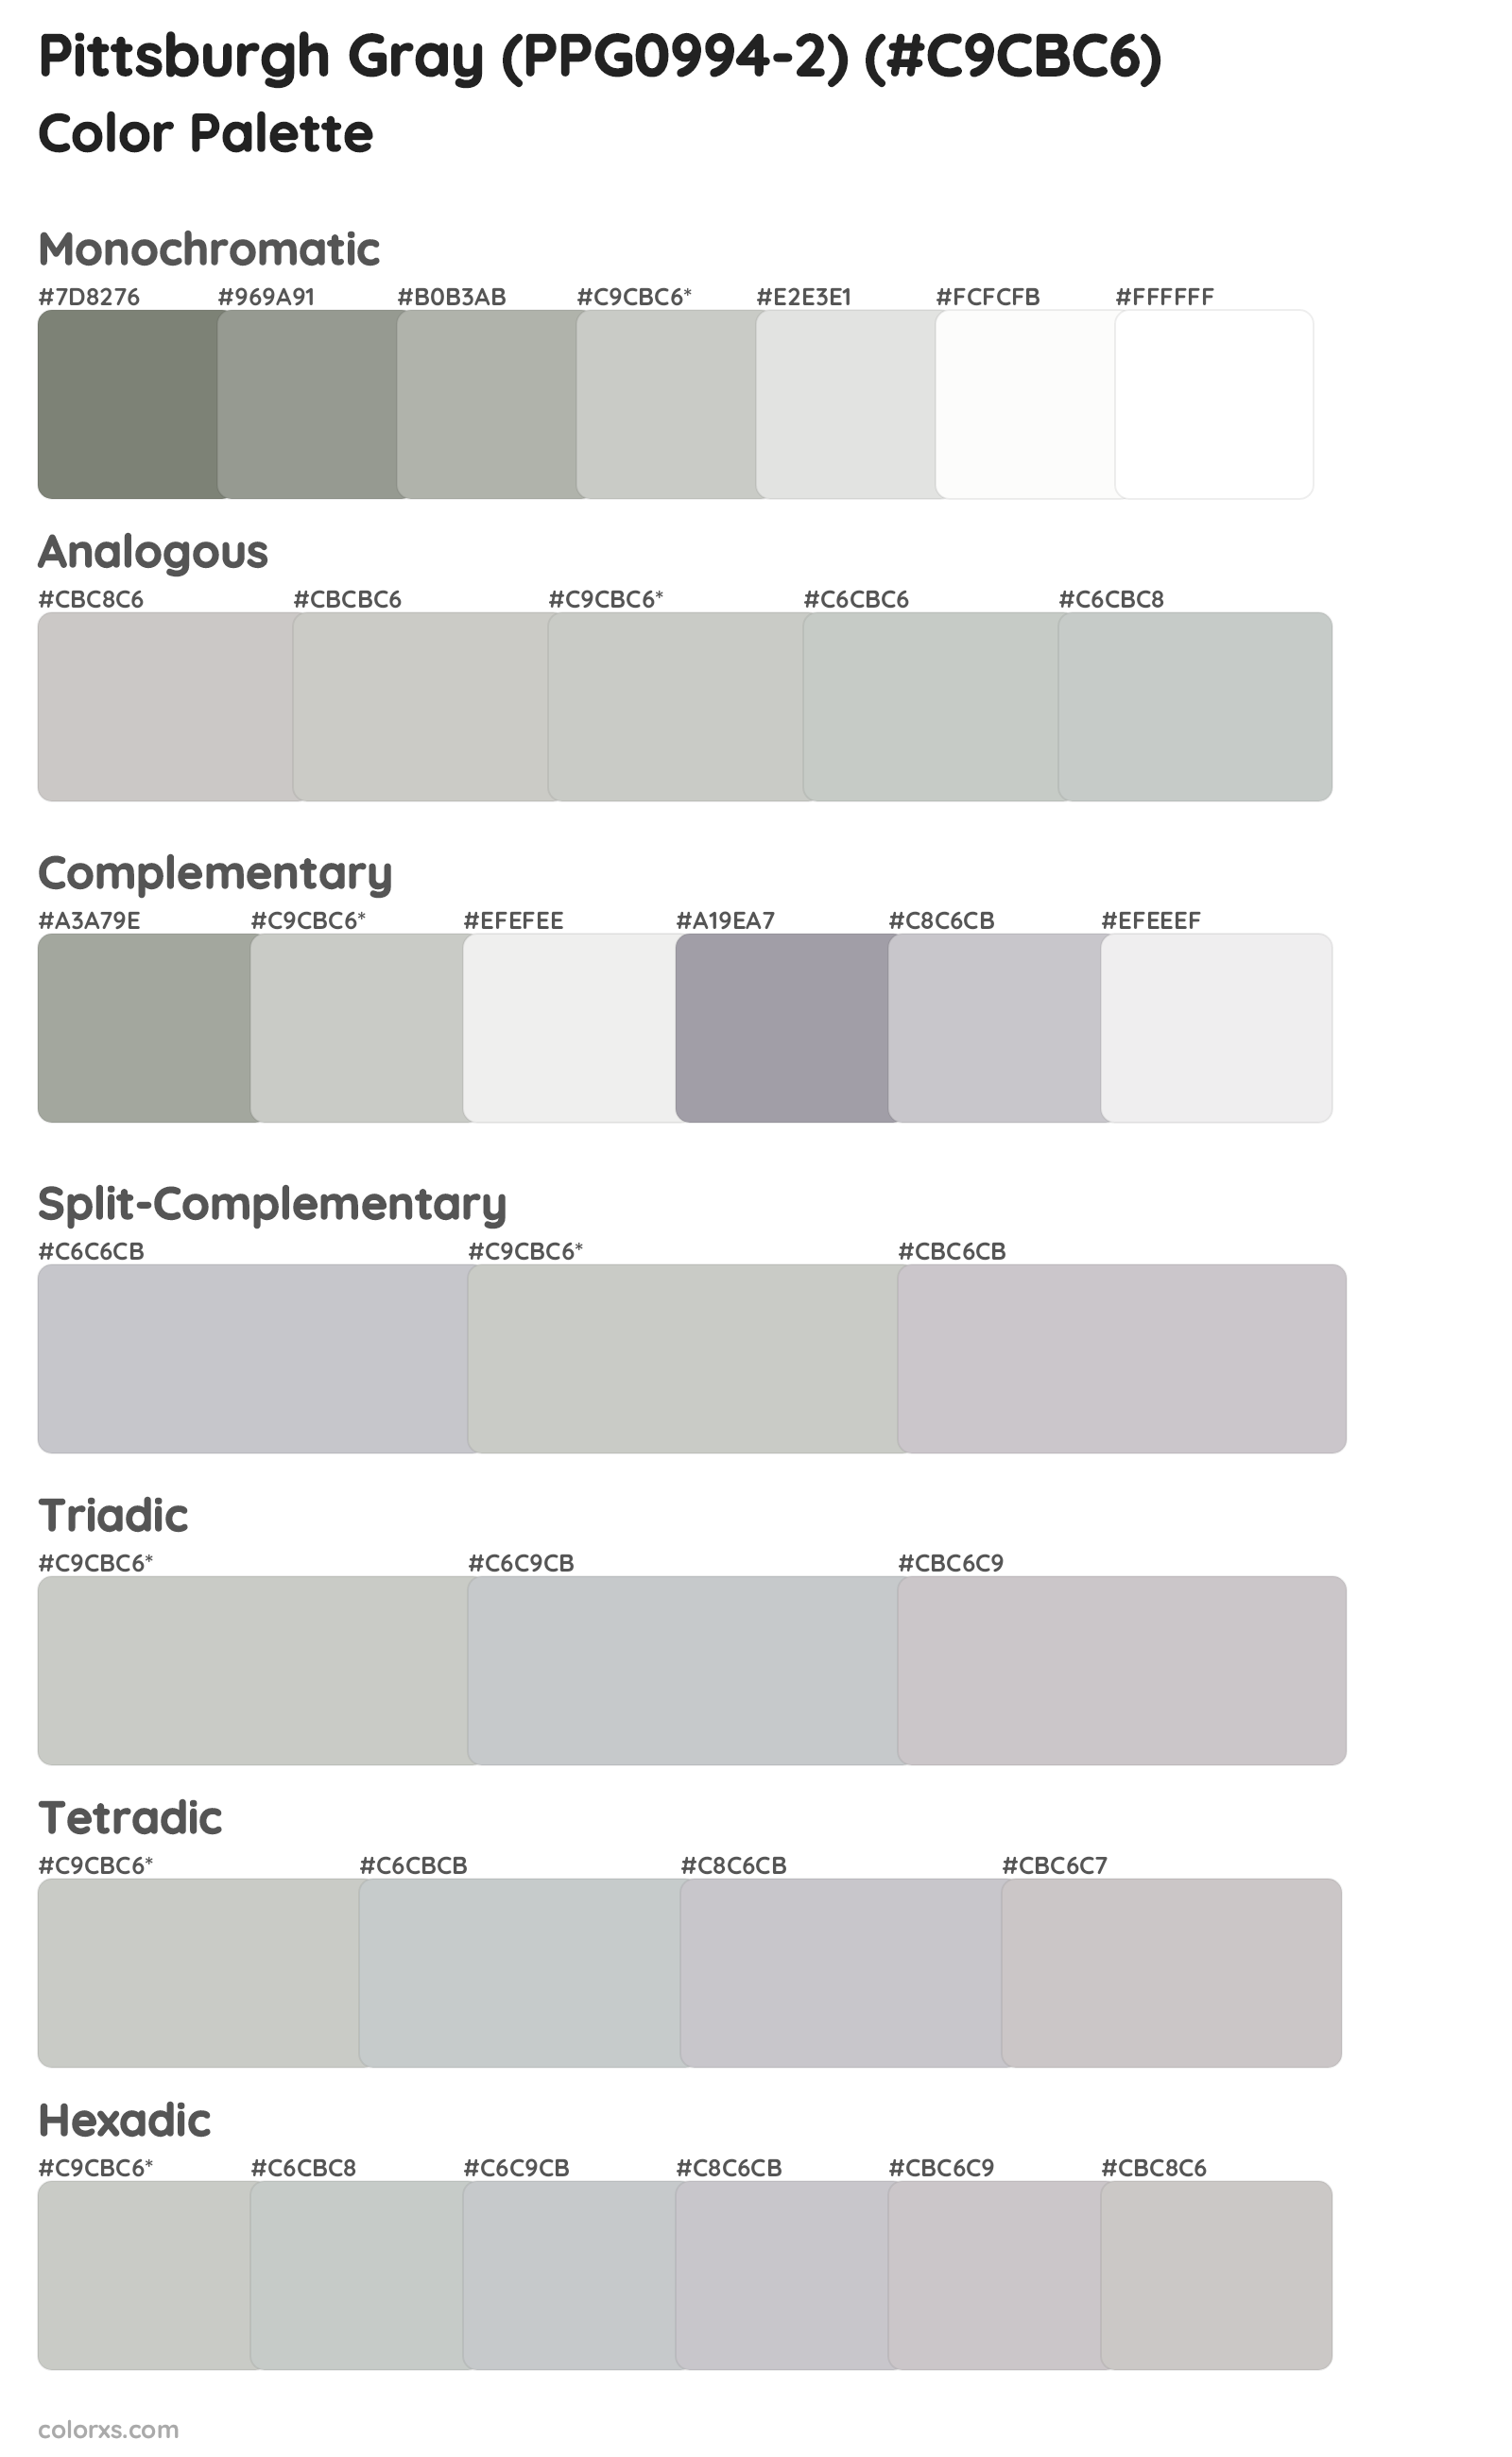 Pittsburgh Gray (PPG0994-2) Color Scheme Palettes